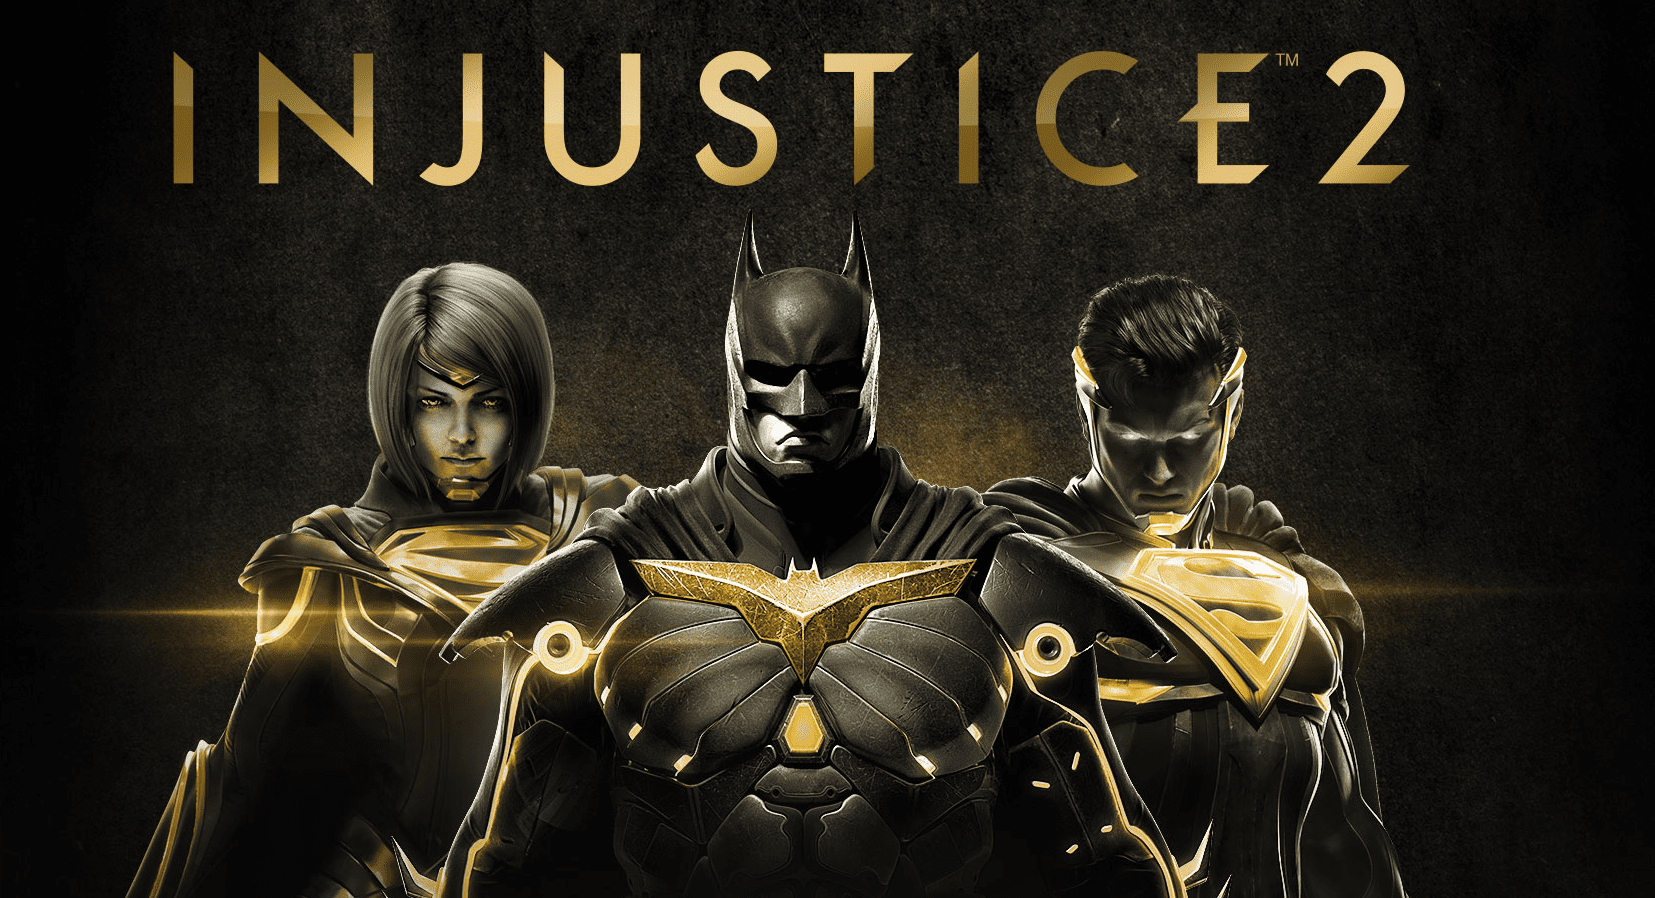 Injustice 2 – Legendary Edition On The Way